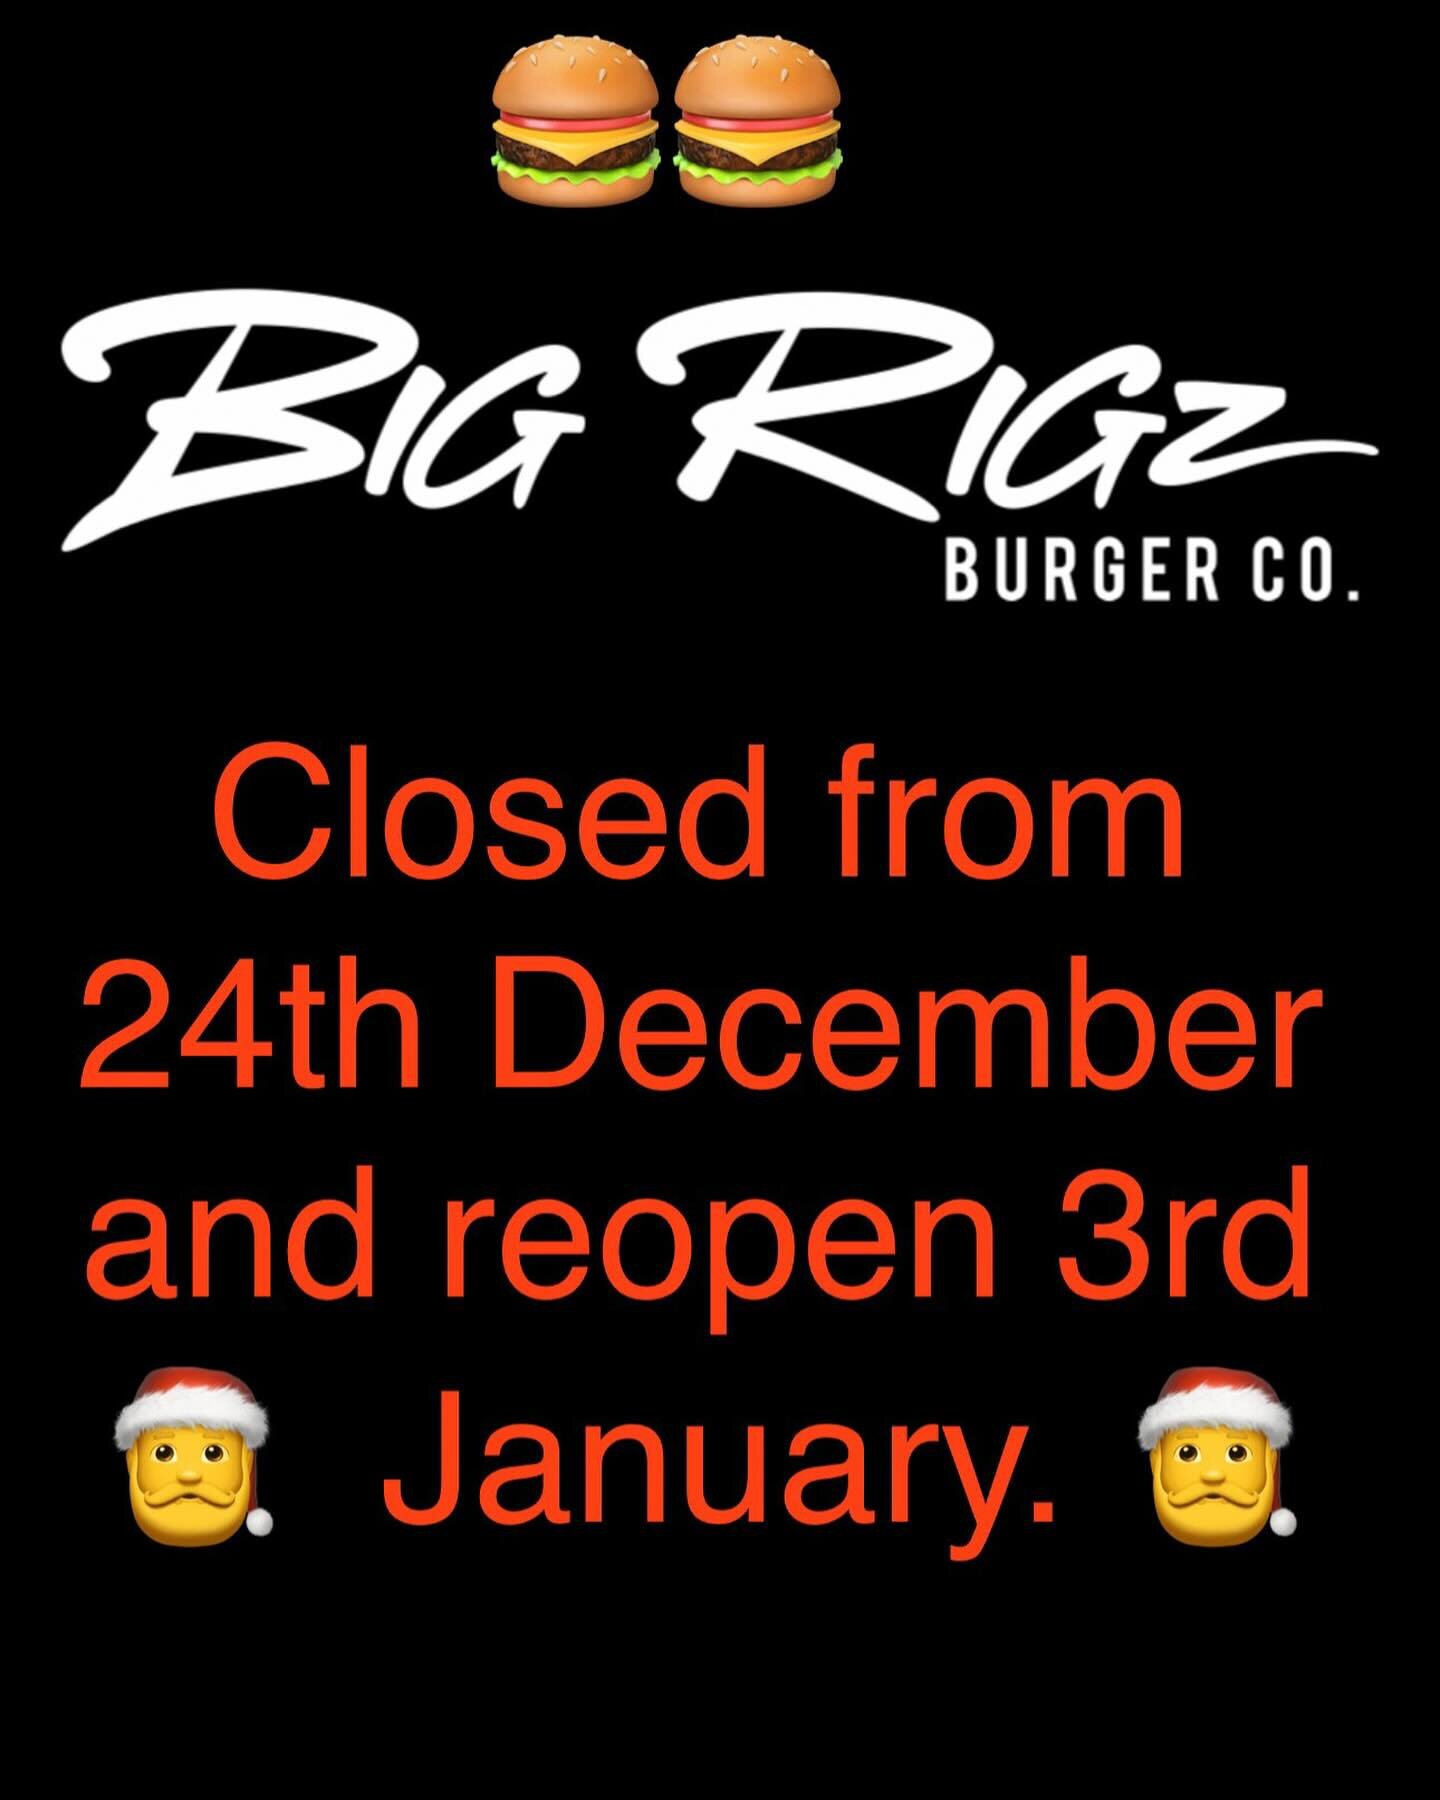 Last week of trade for the year legends! Open until Saturday night this week, closed Sunday 24th then back at it Wednesday 3rd Jan.
It&rsquo;s been a massive year for us with the move into our new premises and we&rsquo;re so grateful for all the supp